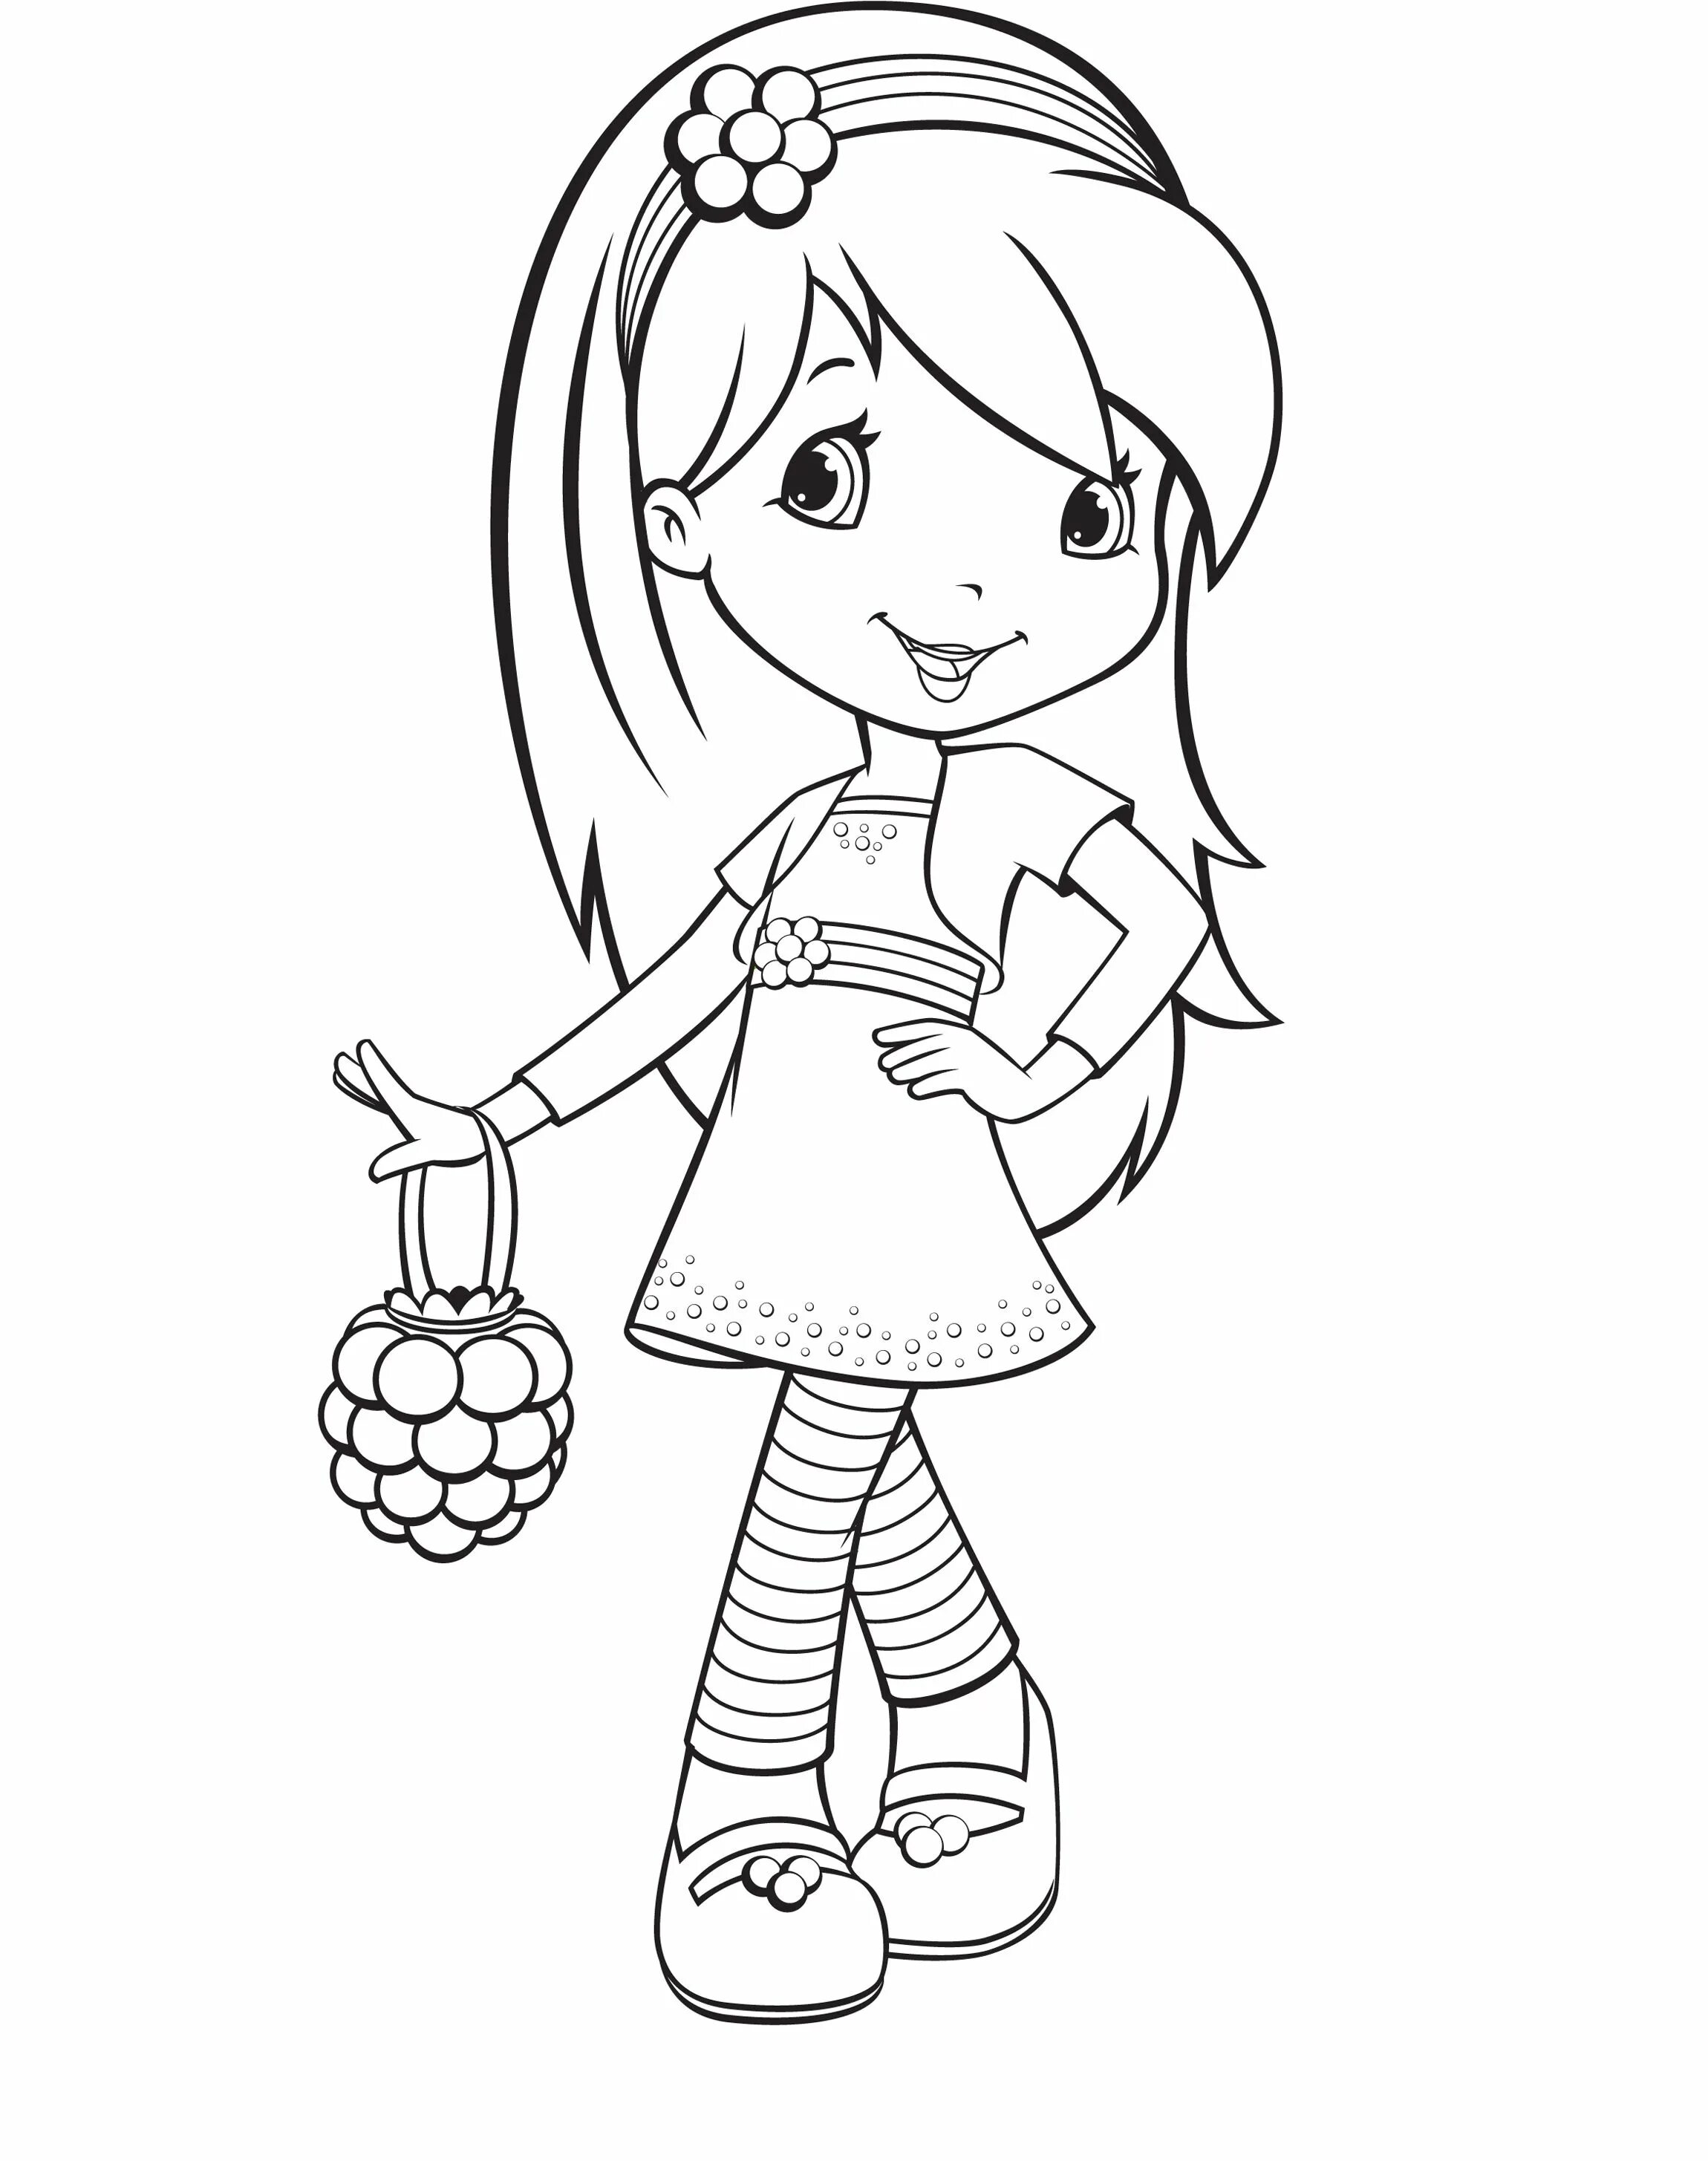 Internet store of unusual coloring pages